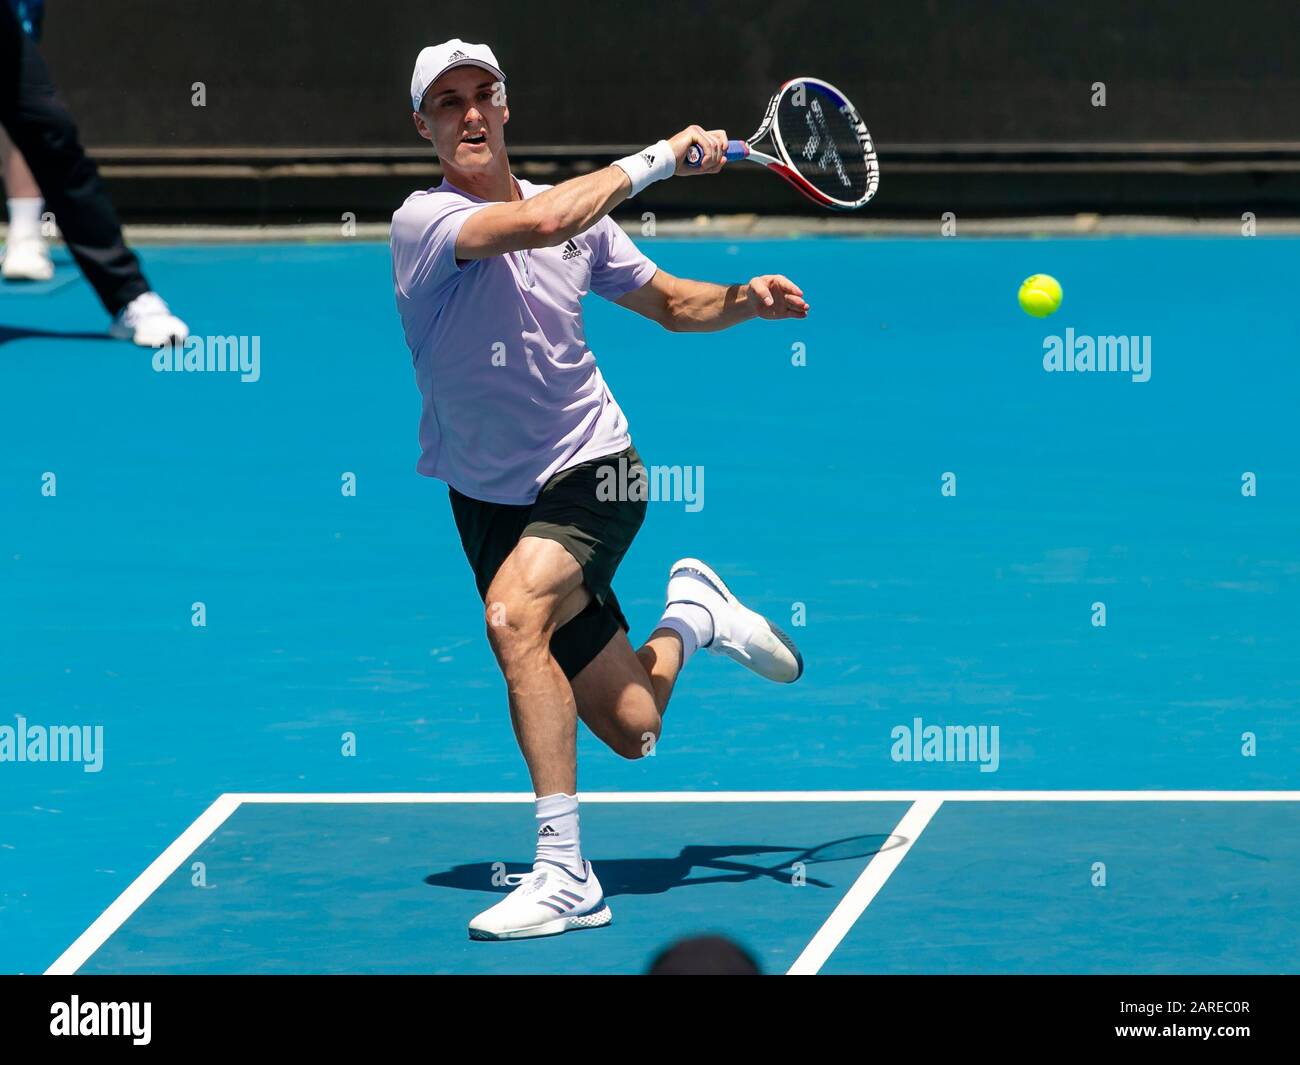 Melbourne, Australia. 28th Jan, 2020. Joe Salisbury from Great Britain in  action during his doubles Quarterfinal match at the 2020 Australian Open Grand  Slam tennis tournament in Melbourne, Australia. Credit: Frank Molter/Alamy